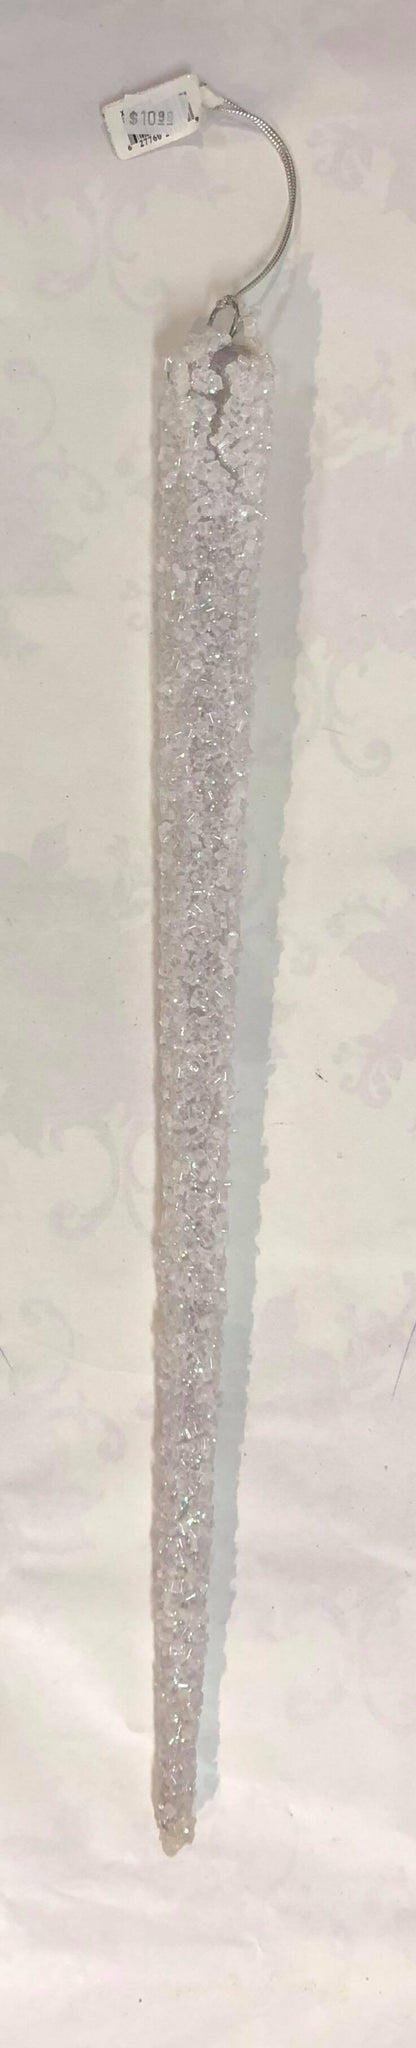 Large icicle ornament